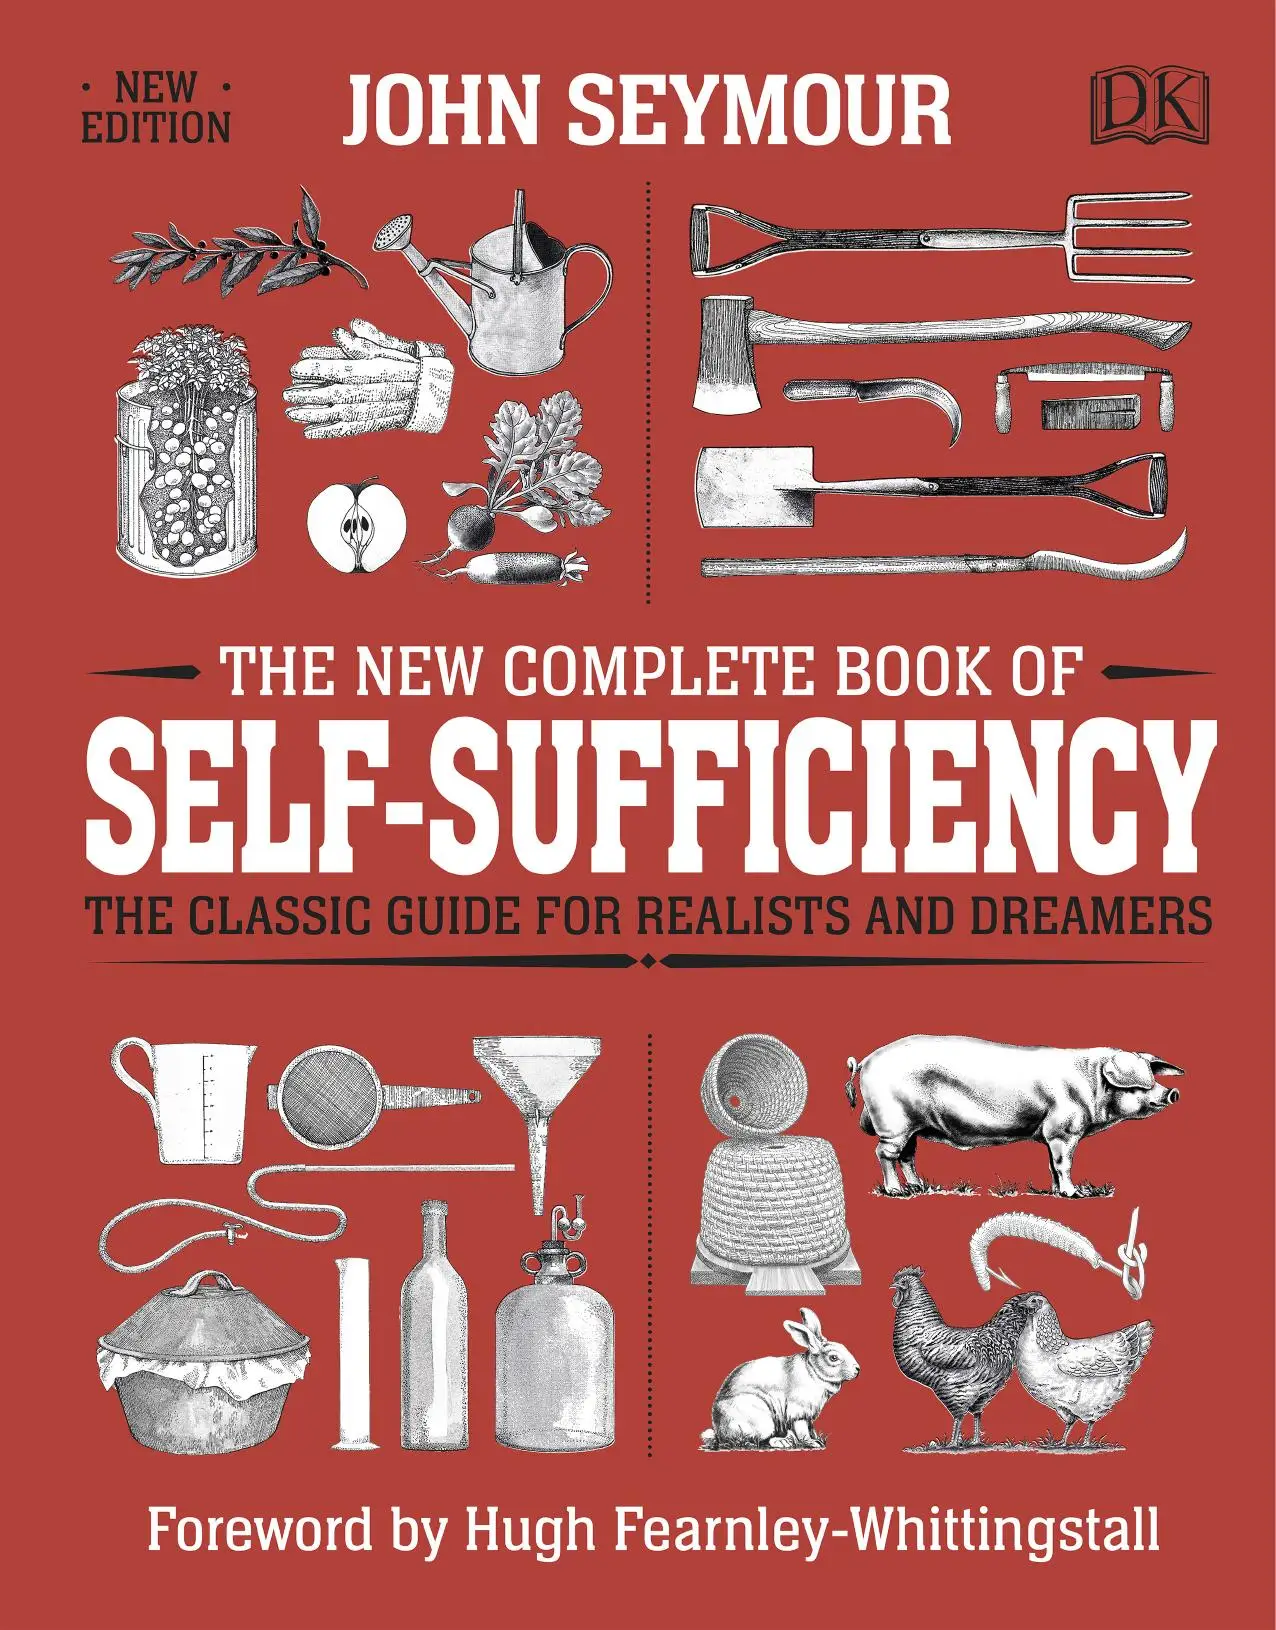 The New Complete Book of Self-Sufficiency: The Classic Guide for